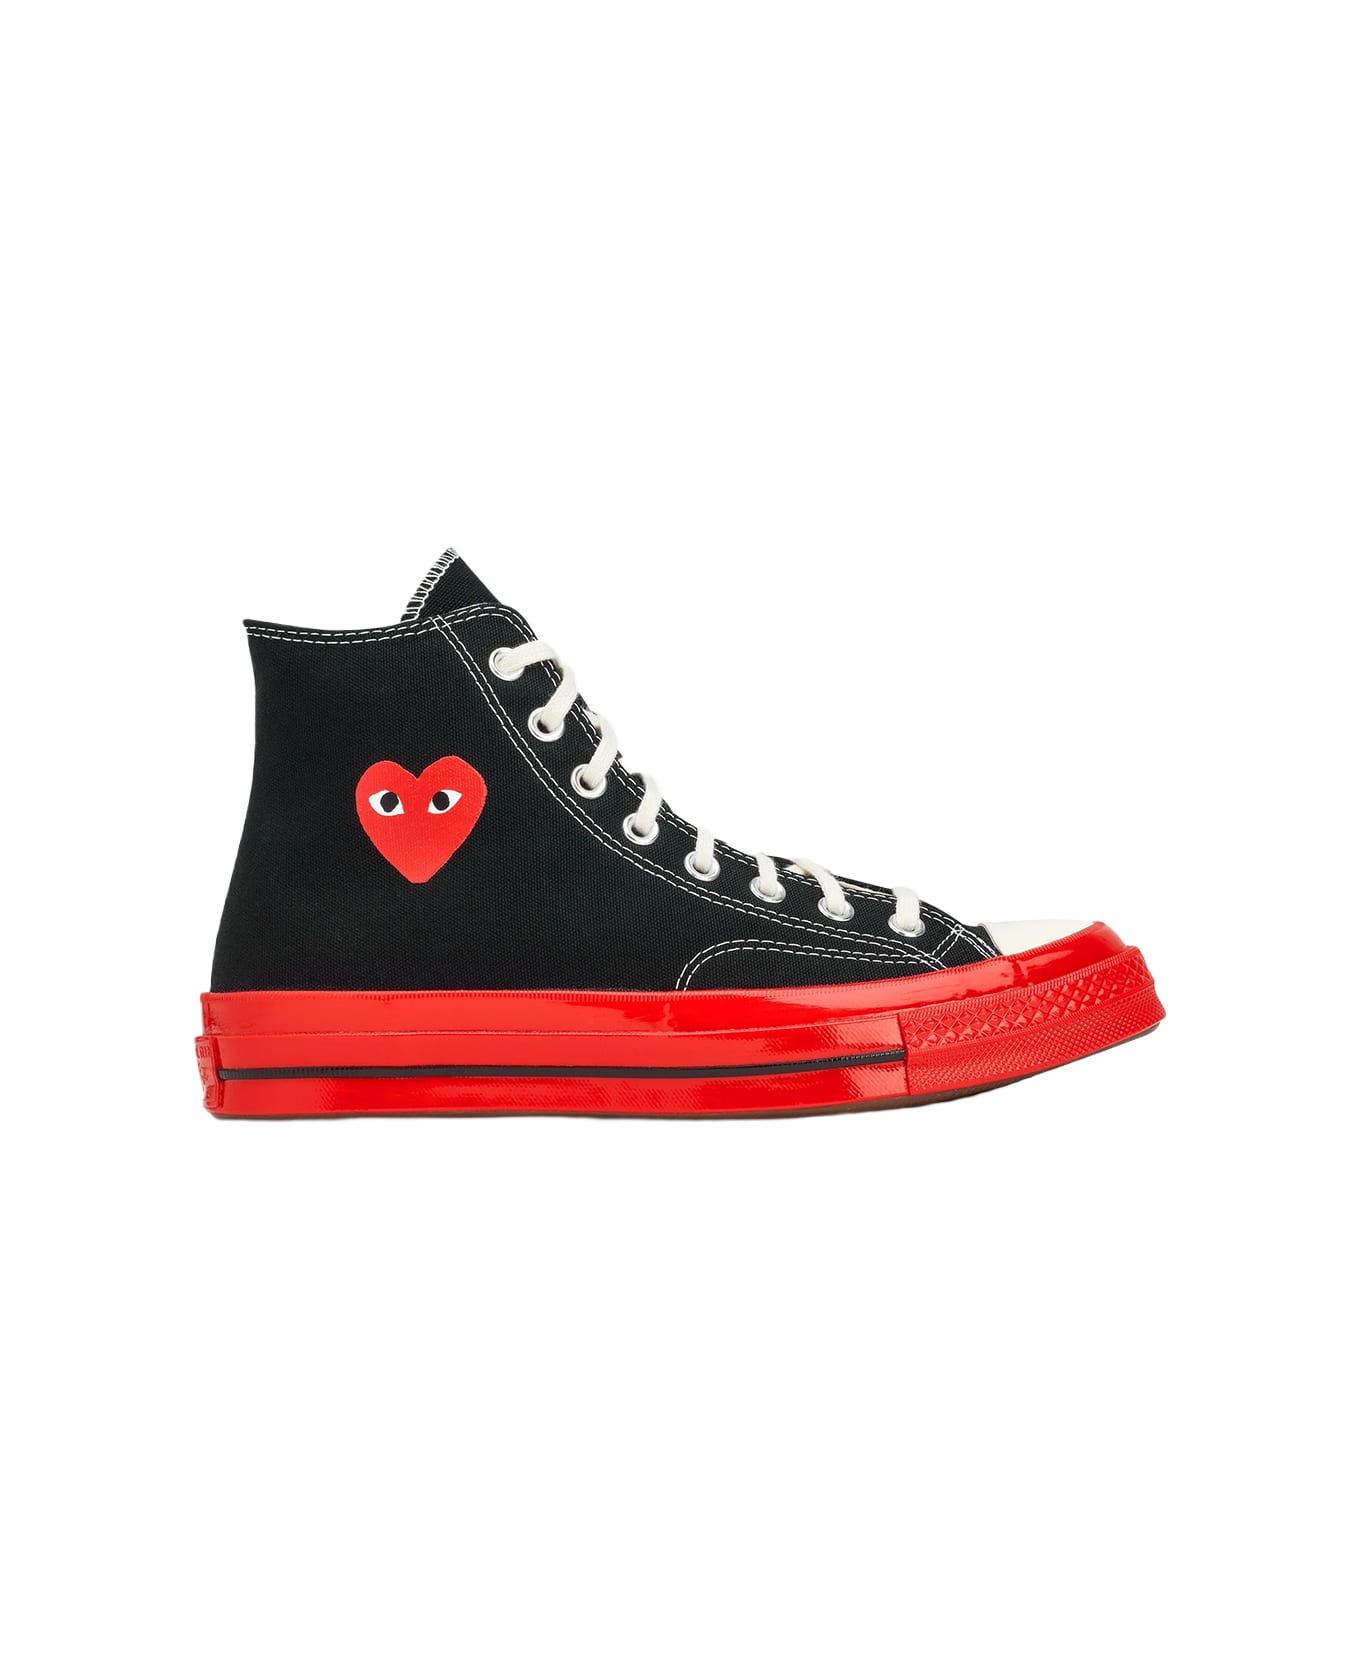 Comme des Garçons Play Ct70 Hi Top Red Sole Shoes Converse collaboration Chuck Taylor 70s black canvas sneaker with red sole. - Nero